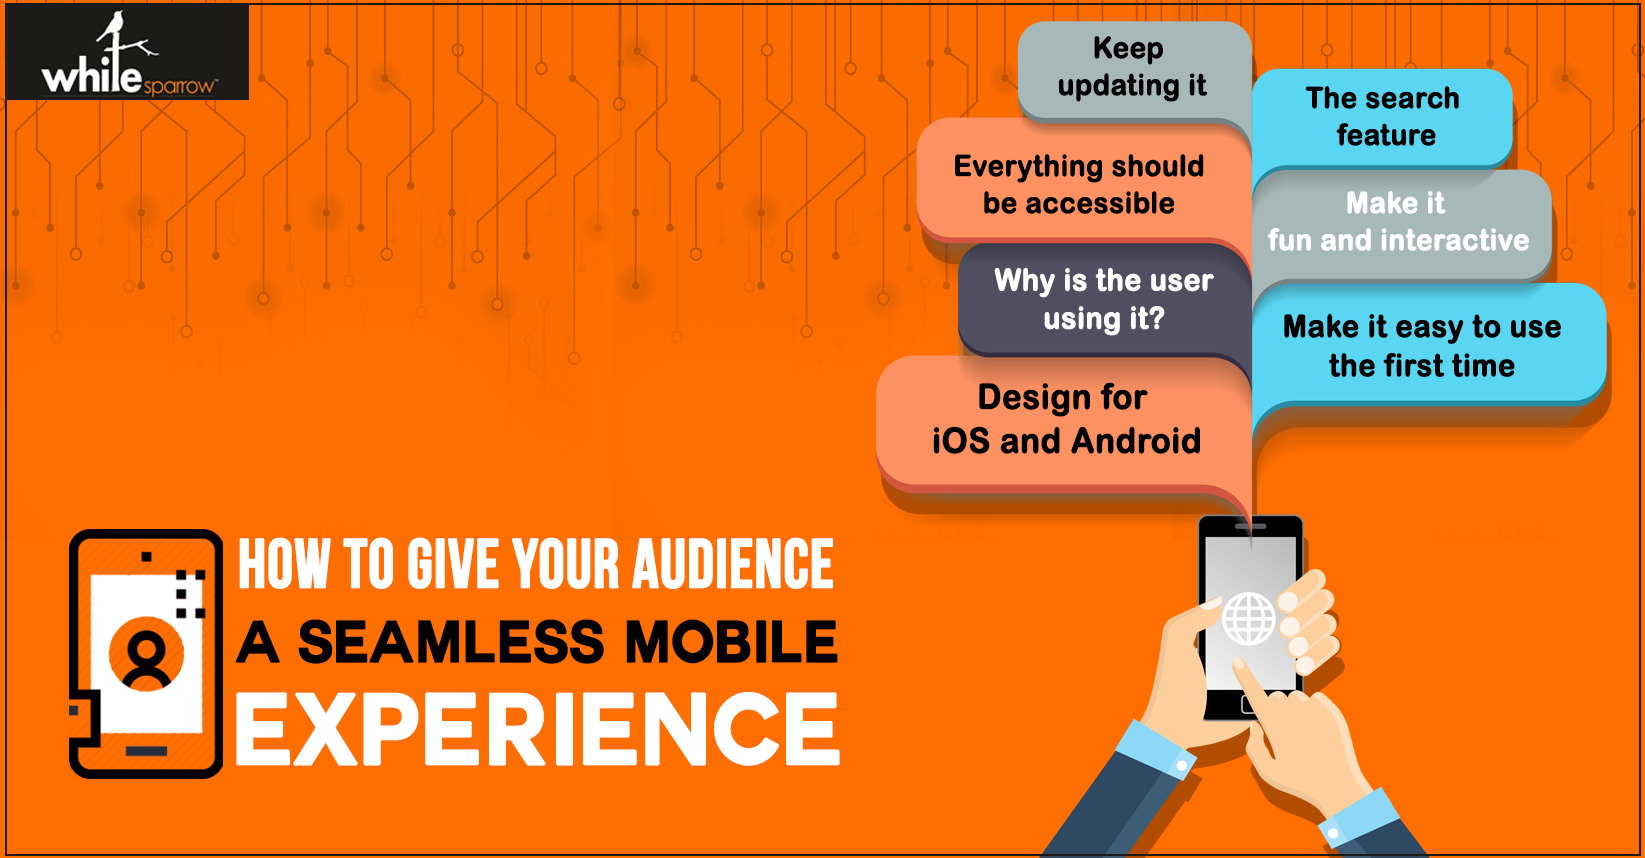 How to give your audience a seamless mobile experience